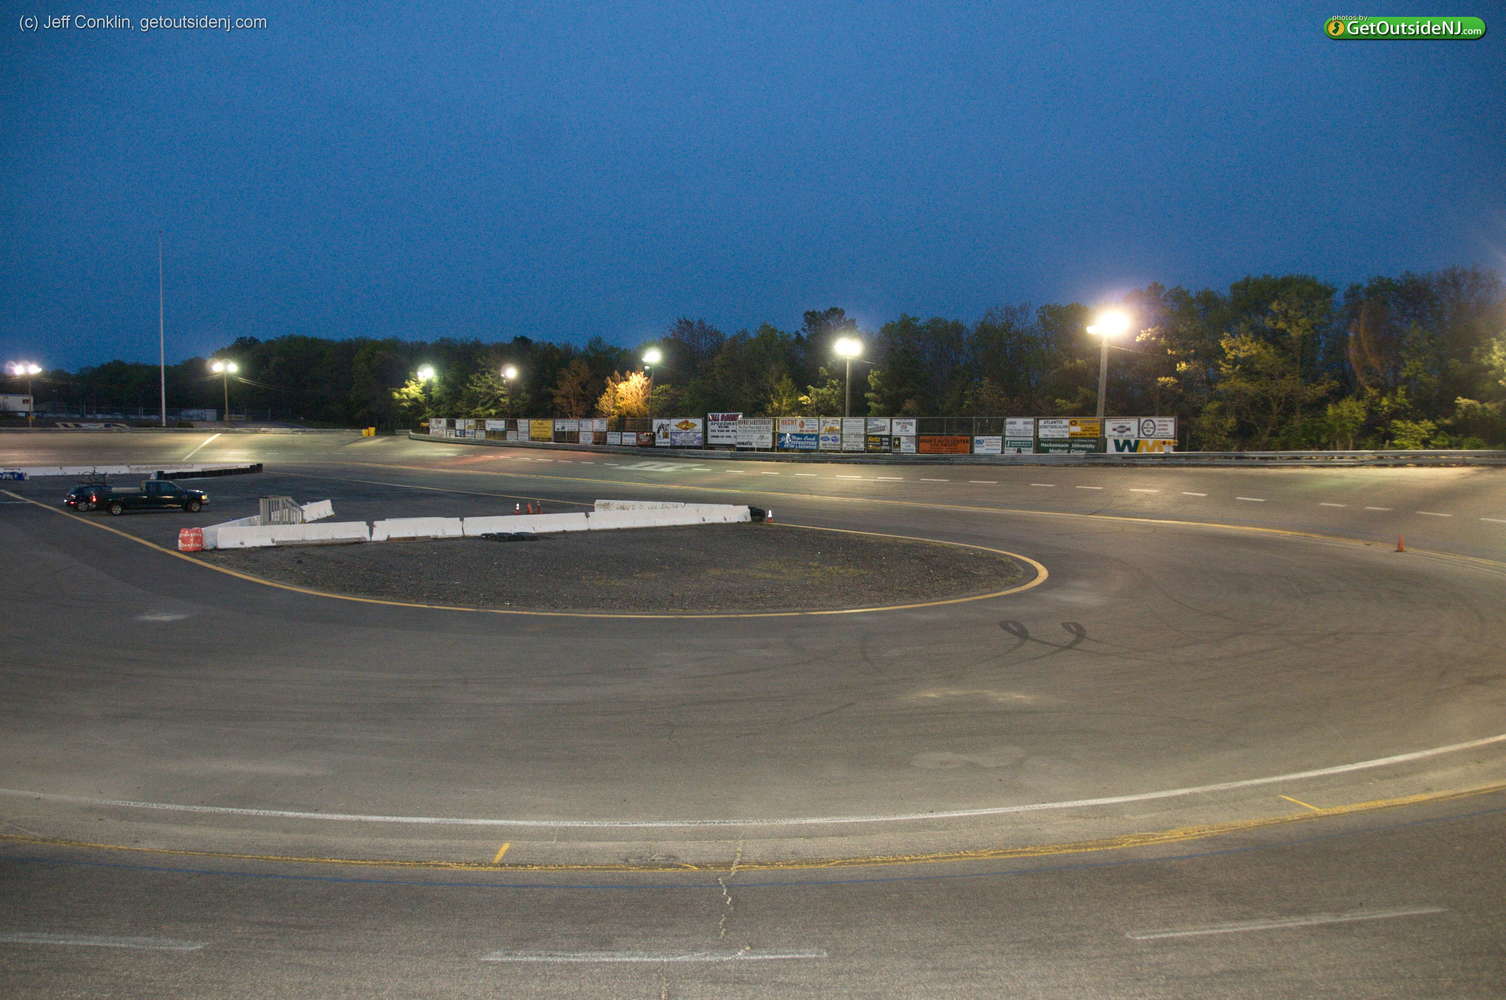 wall township speedway